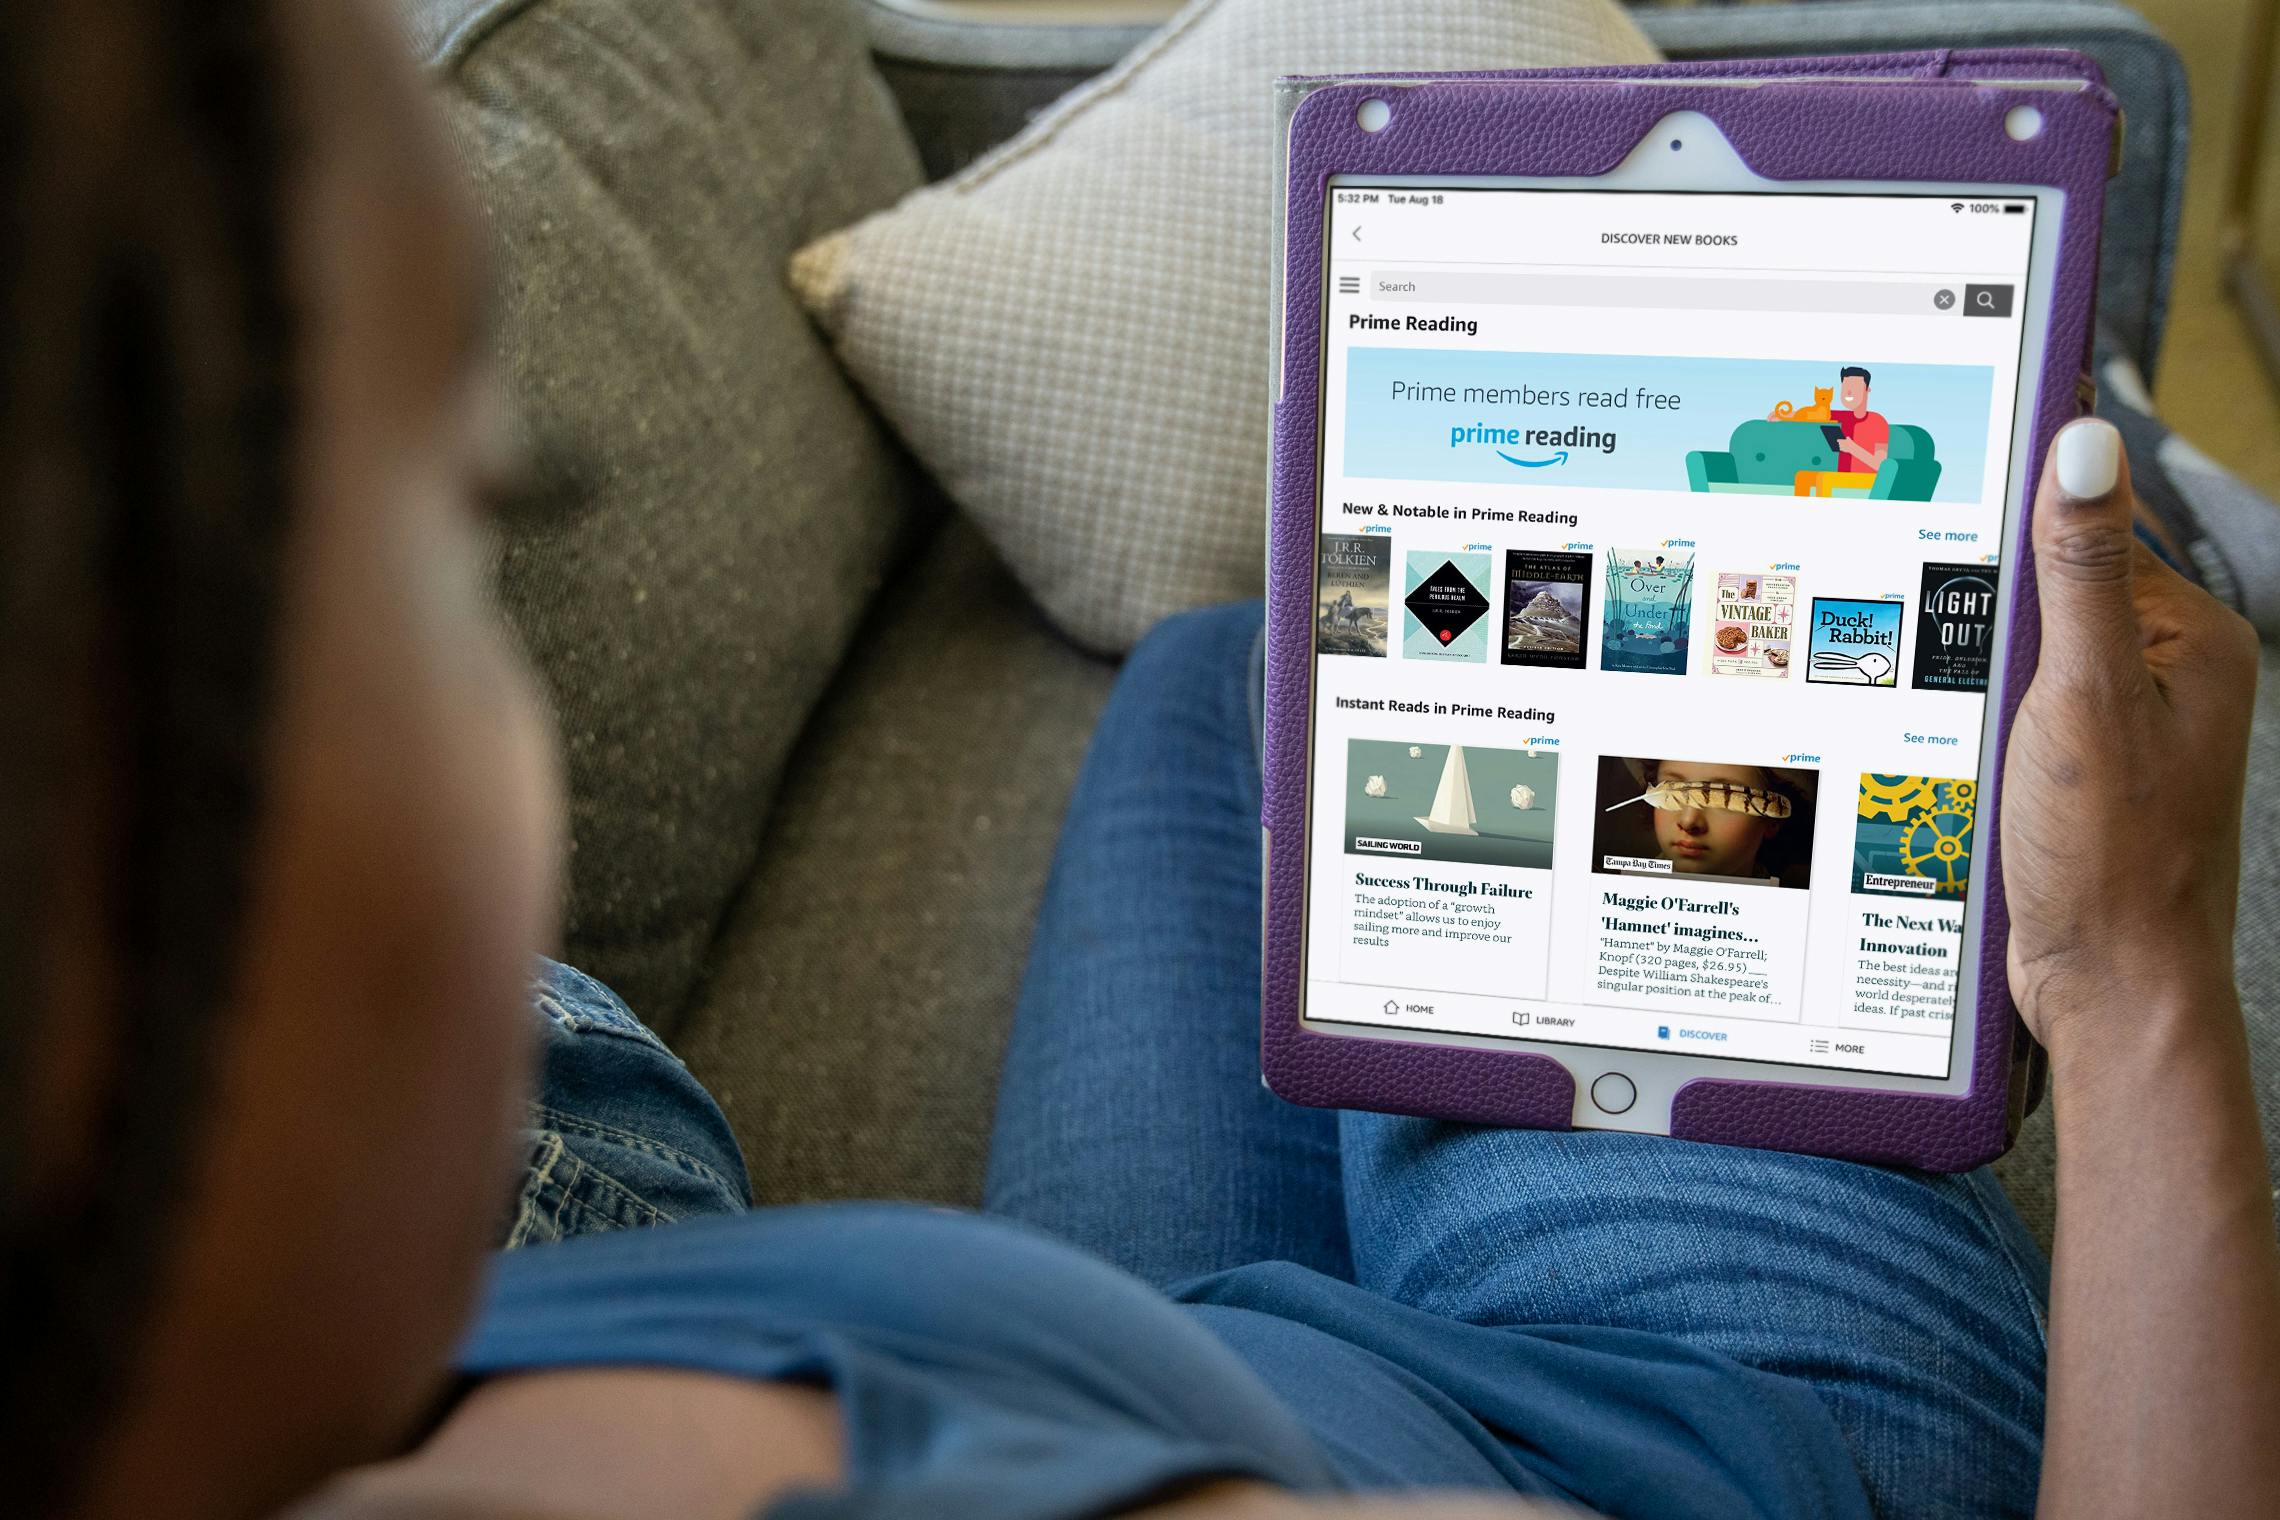 A woman sitting on a couch, looking down at an iPad which is displaying the Amazon website's page for Prime Reading.